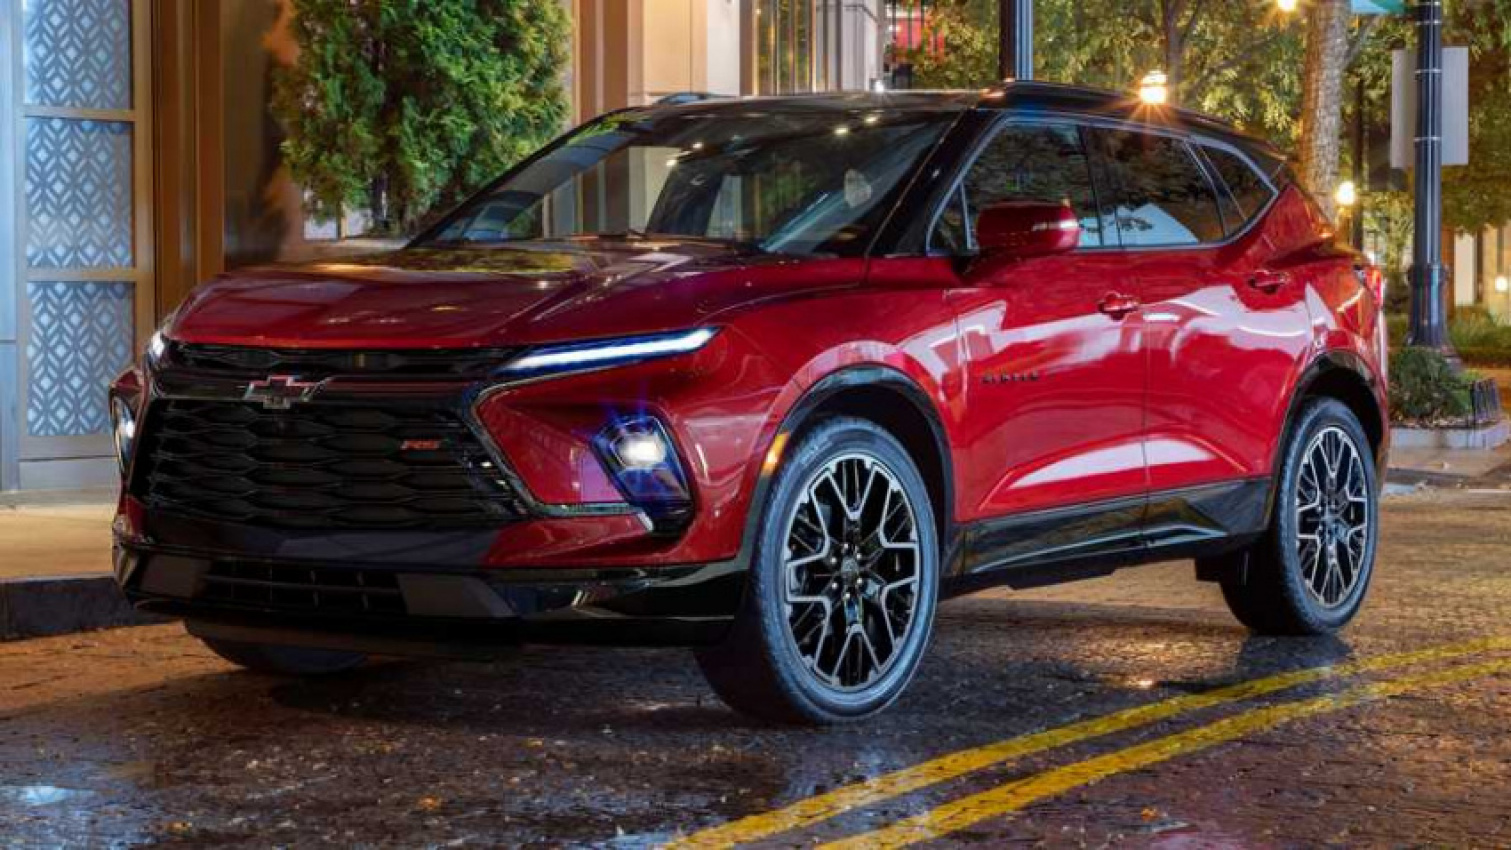 autos, cars, chevrolet, 2023 chevrolet blazer revealed with small facelift, large touchscreen